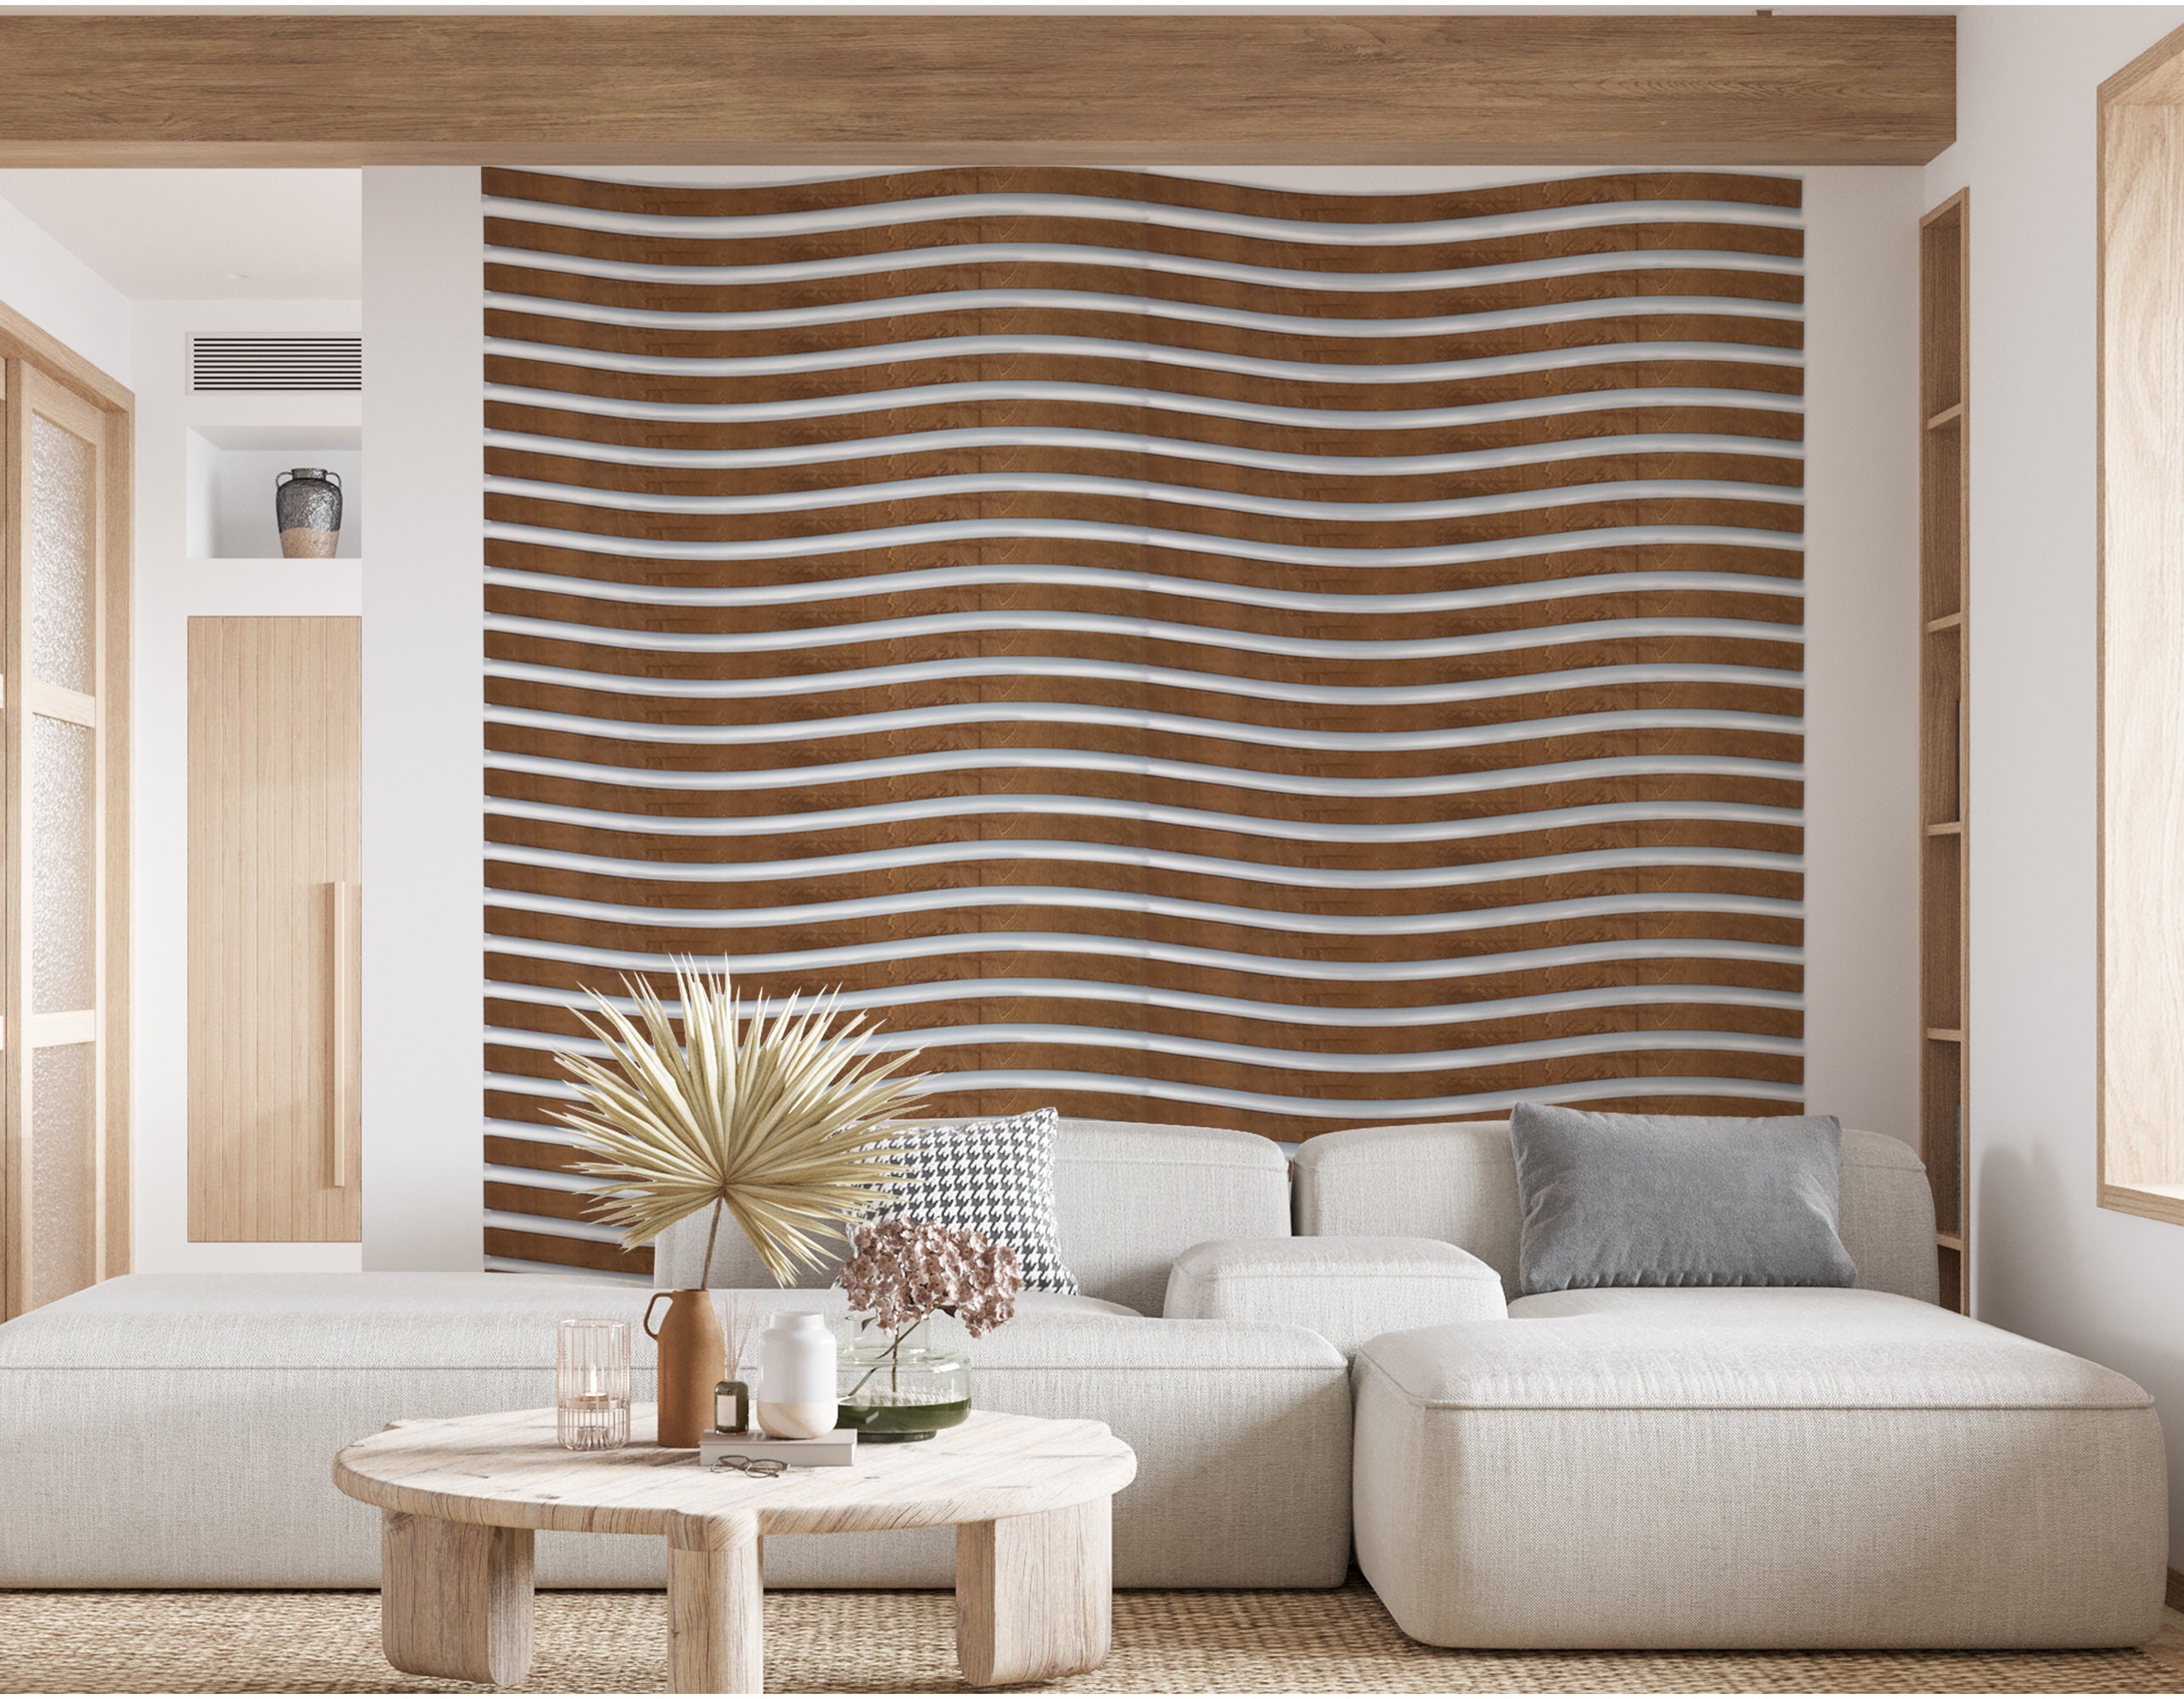 Curved Slatted Wood Wall Panel